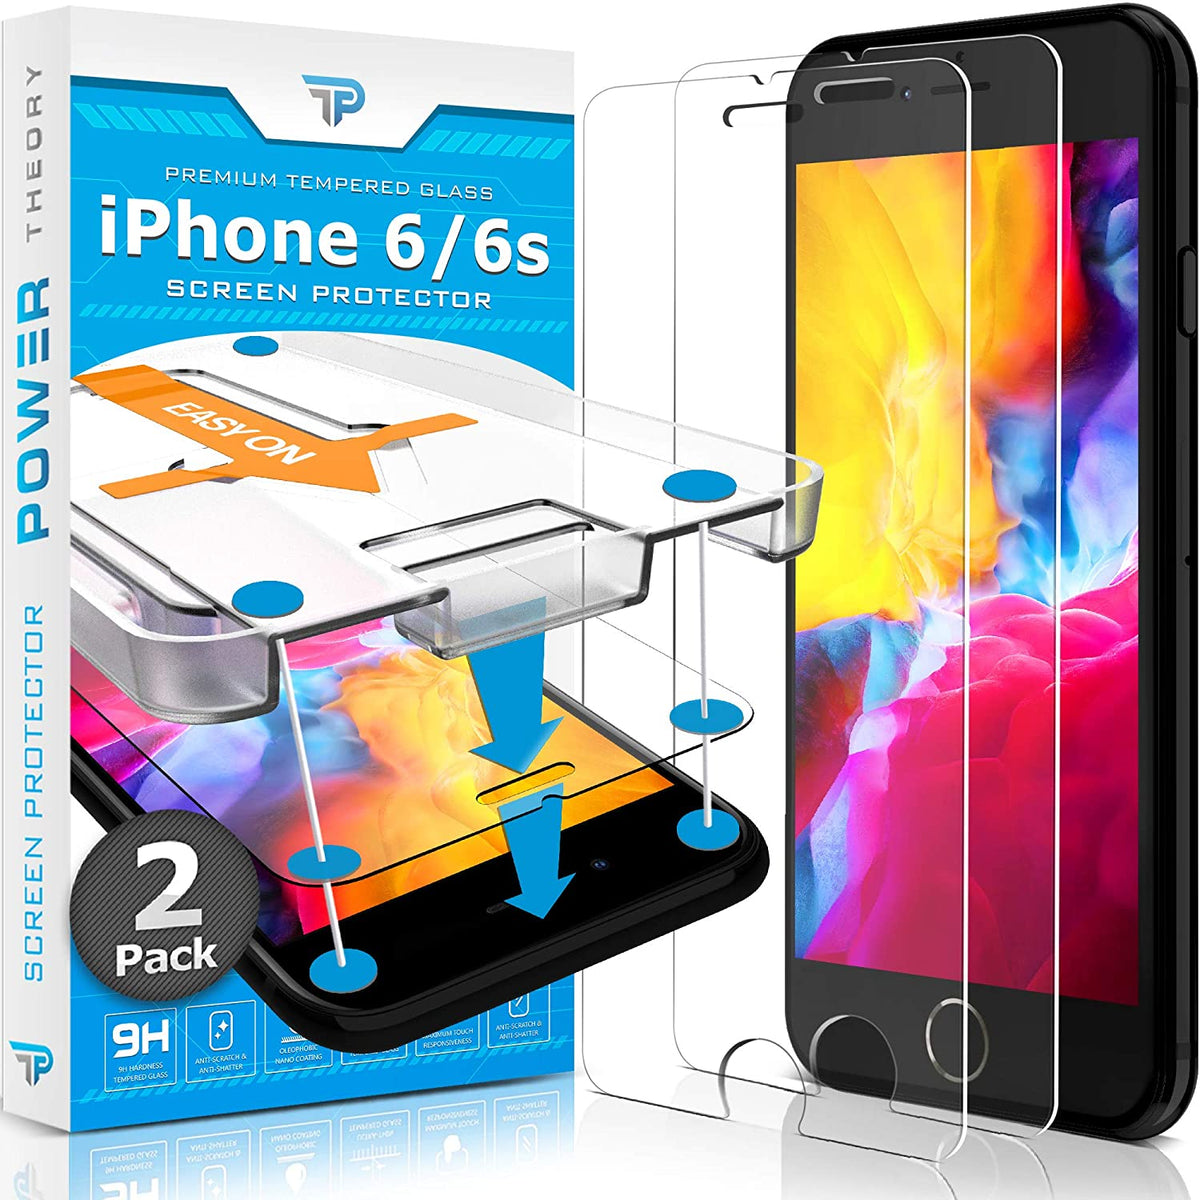 iPhone 6S / iPhone 6 Tempered Glass Screen Protector [2-Pack] Cover